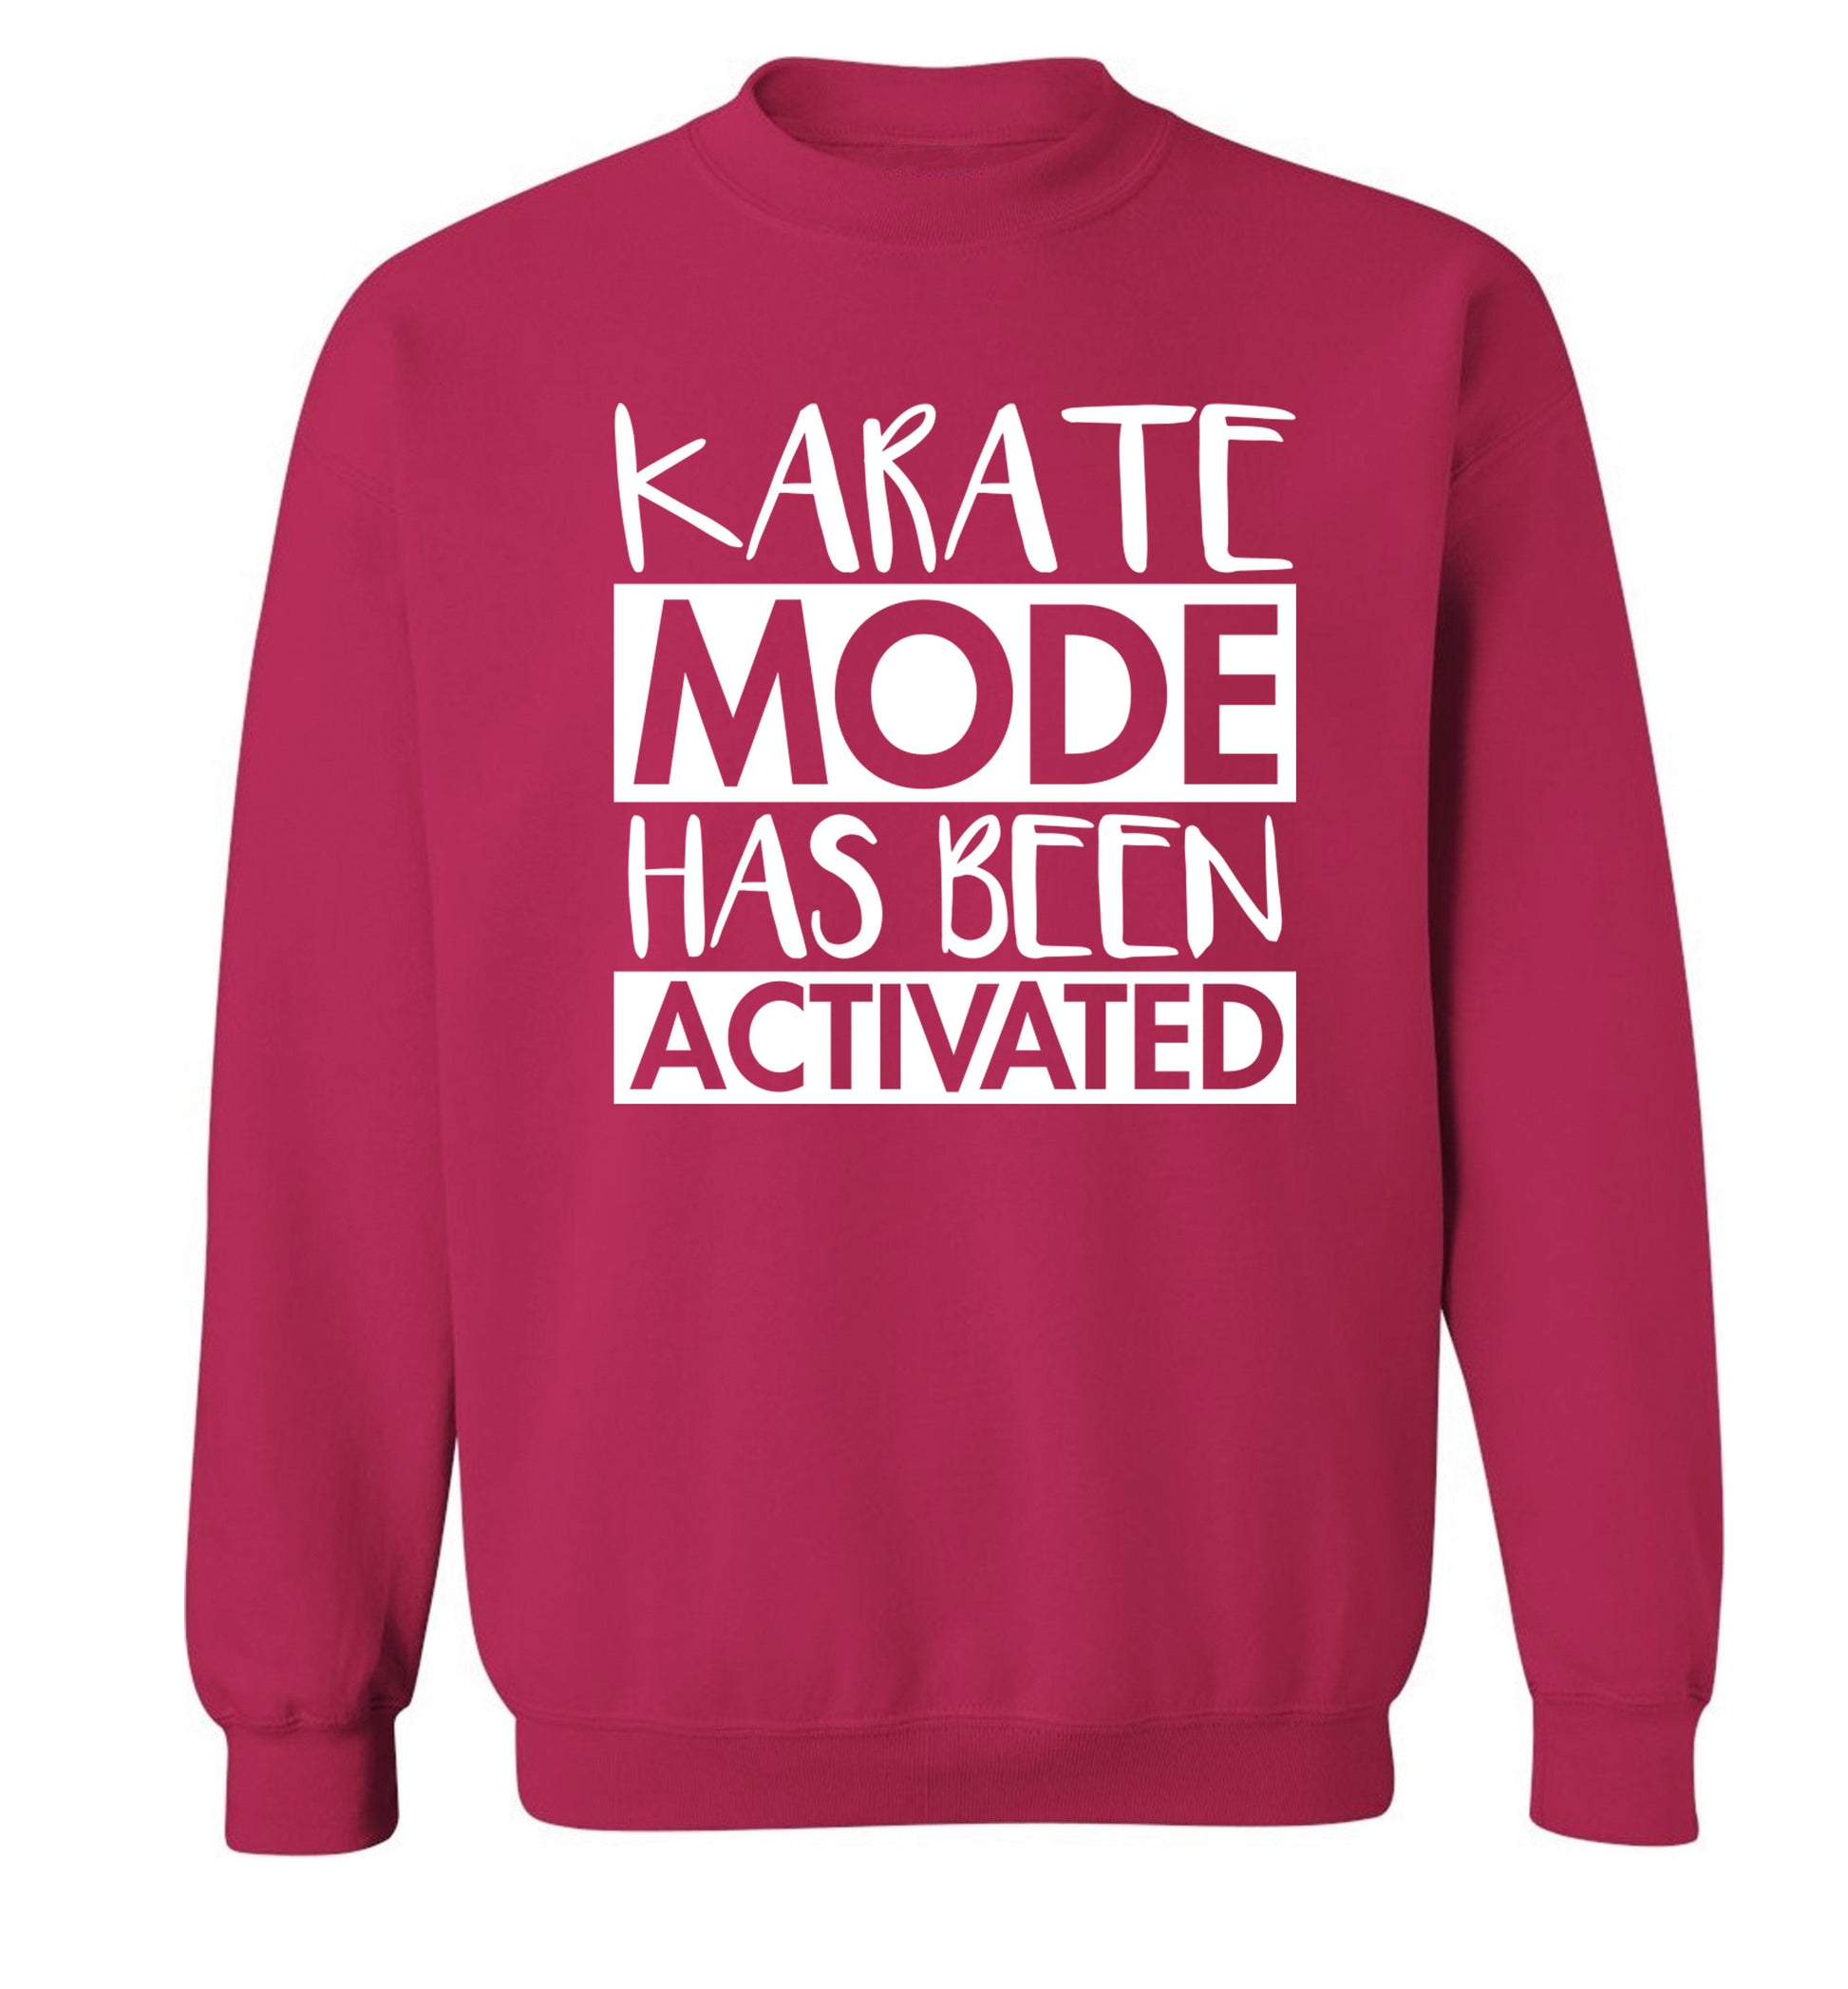 Karate mode activated Adult's unisex pink Sweater 2XL